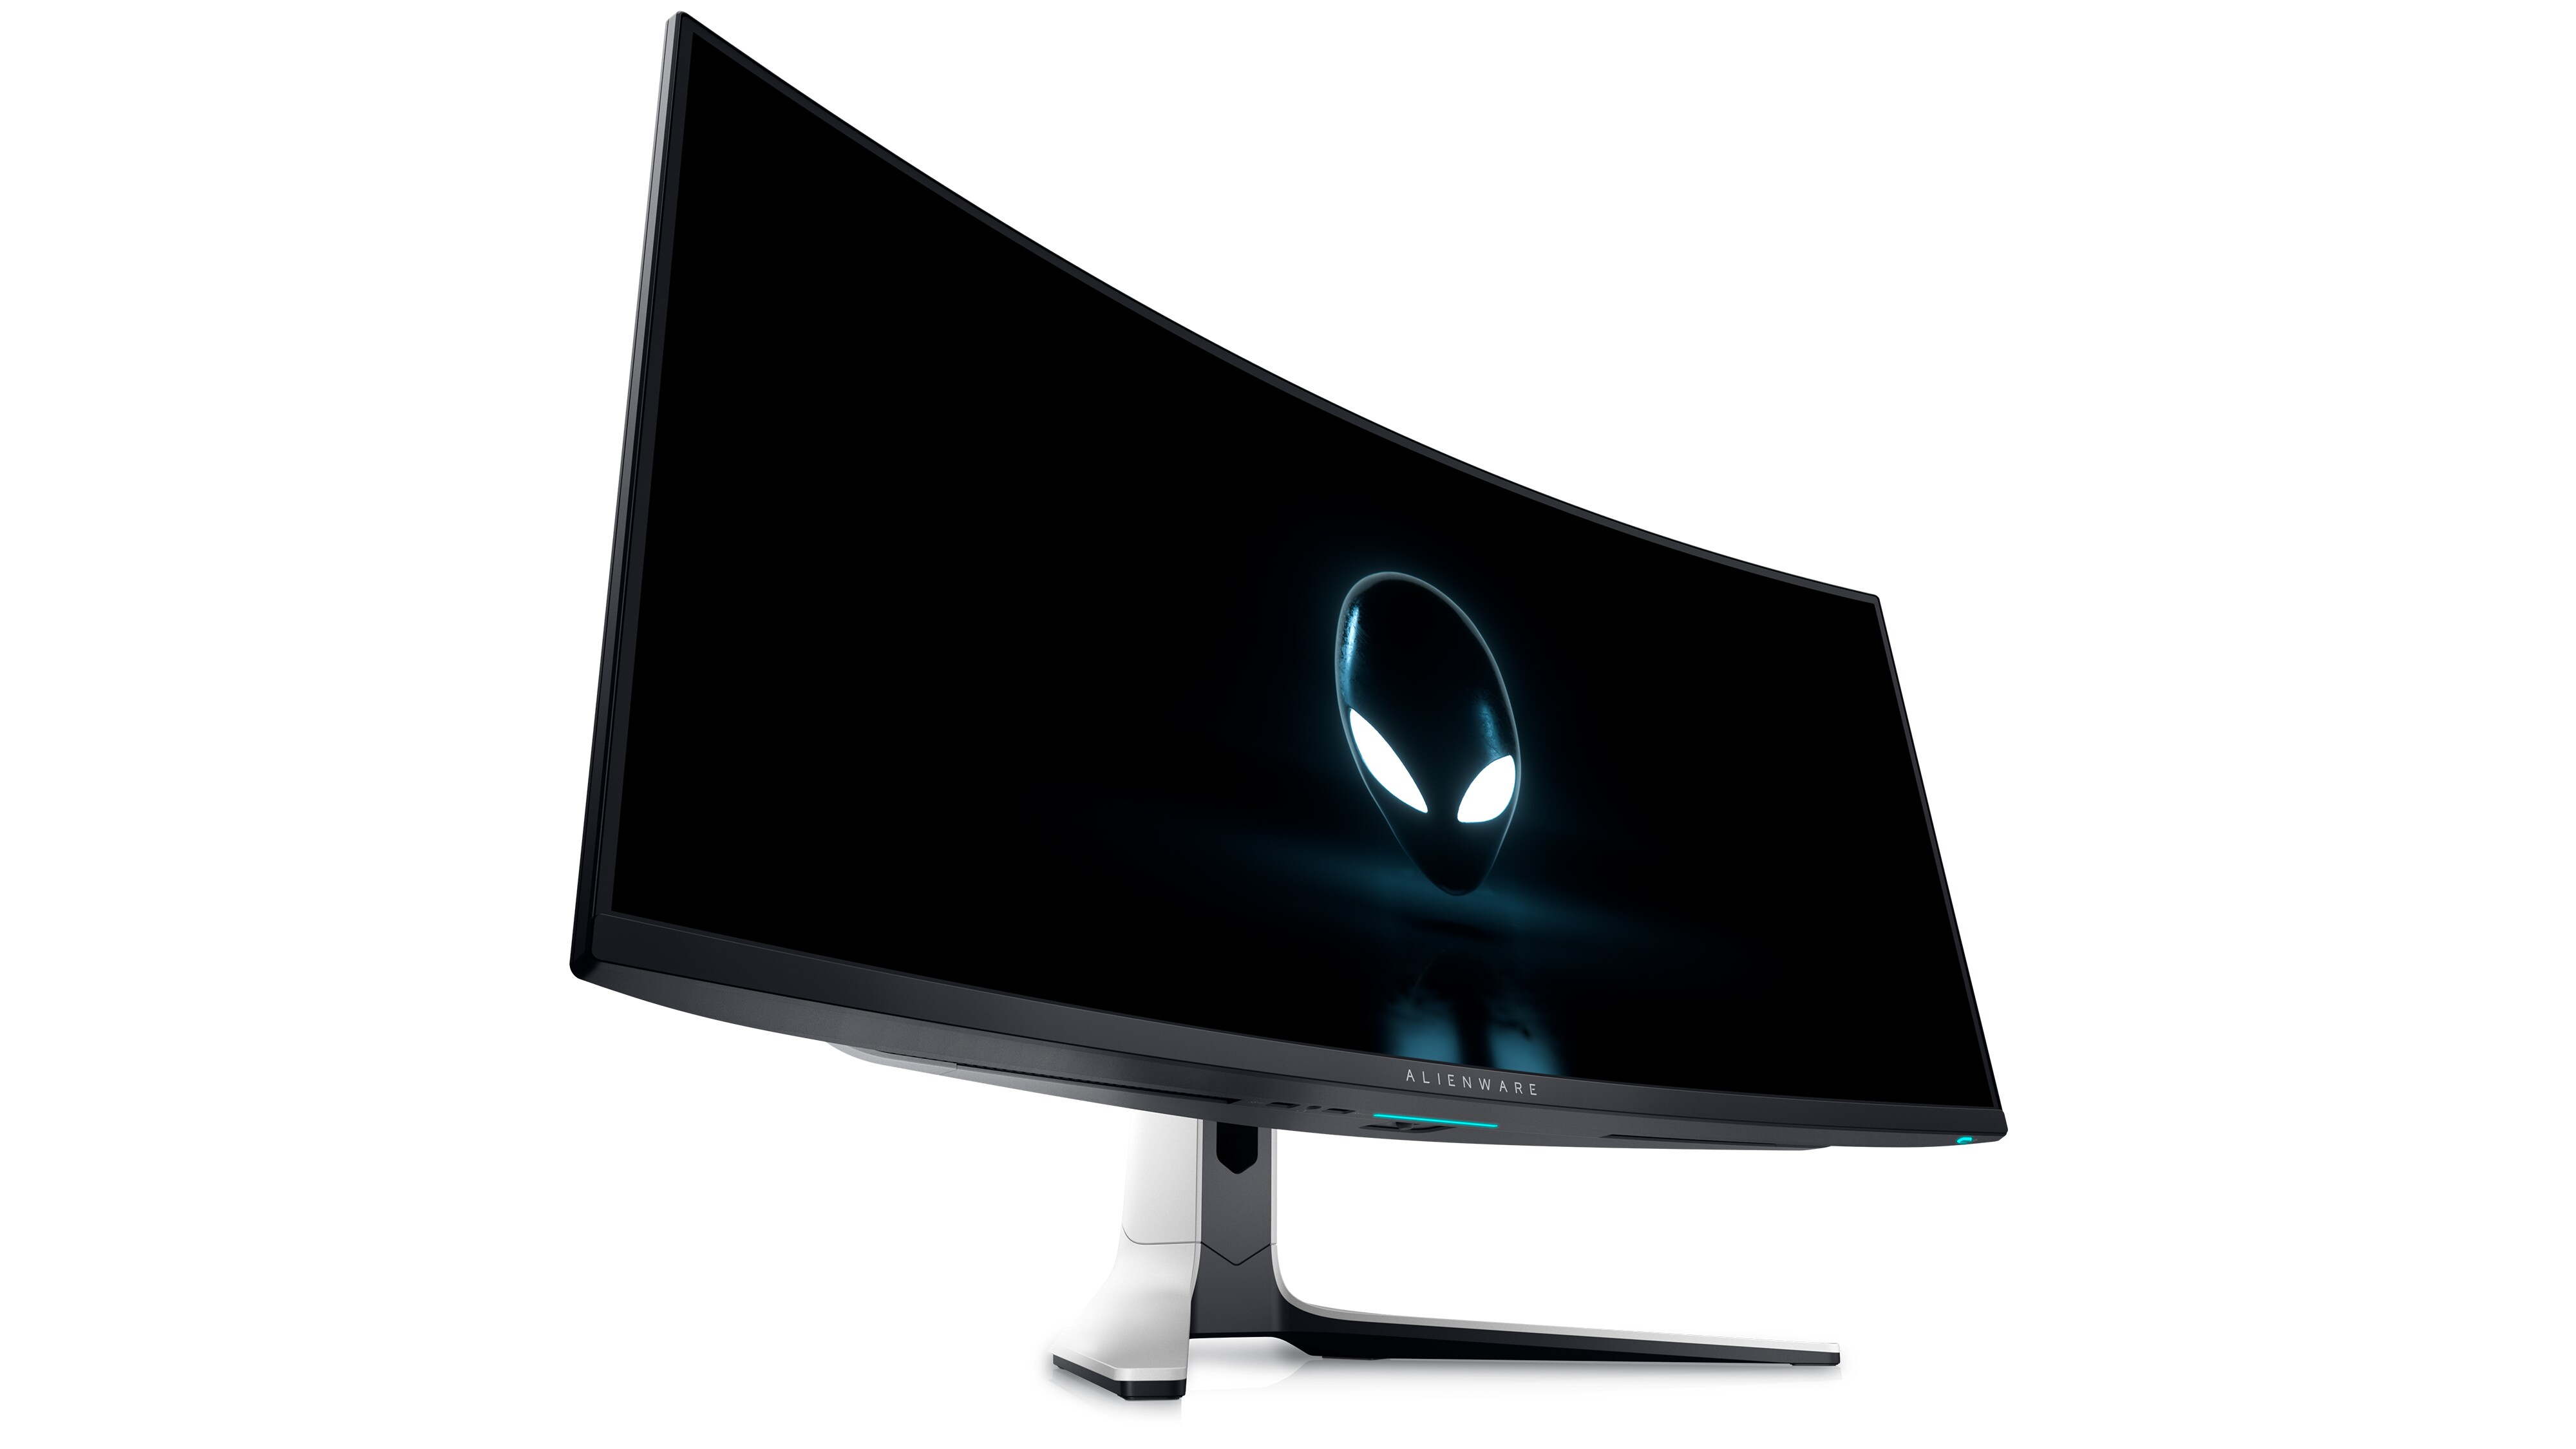 Alienware Curved Gaming Monitor | AW3423DW